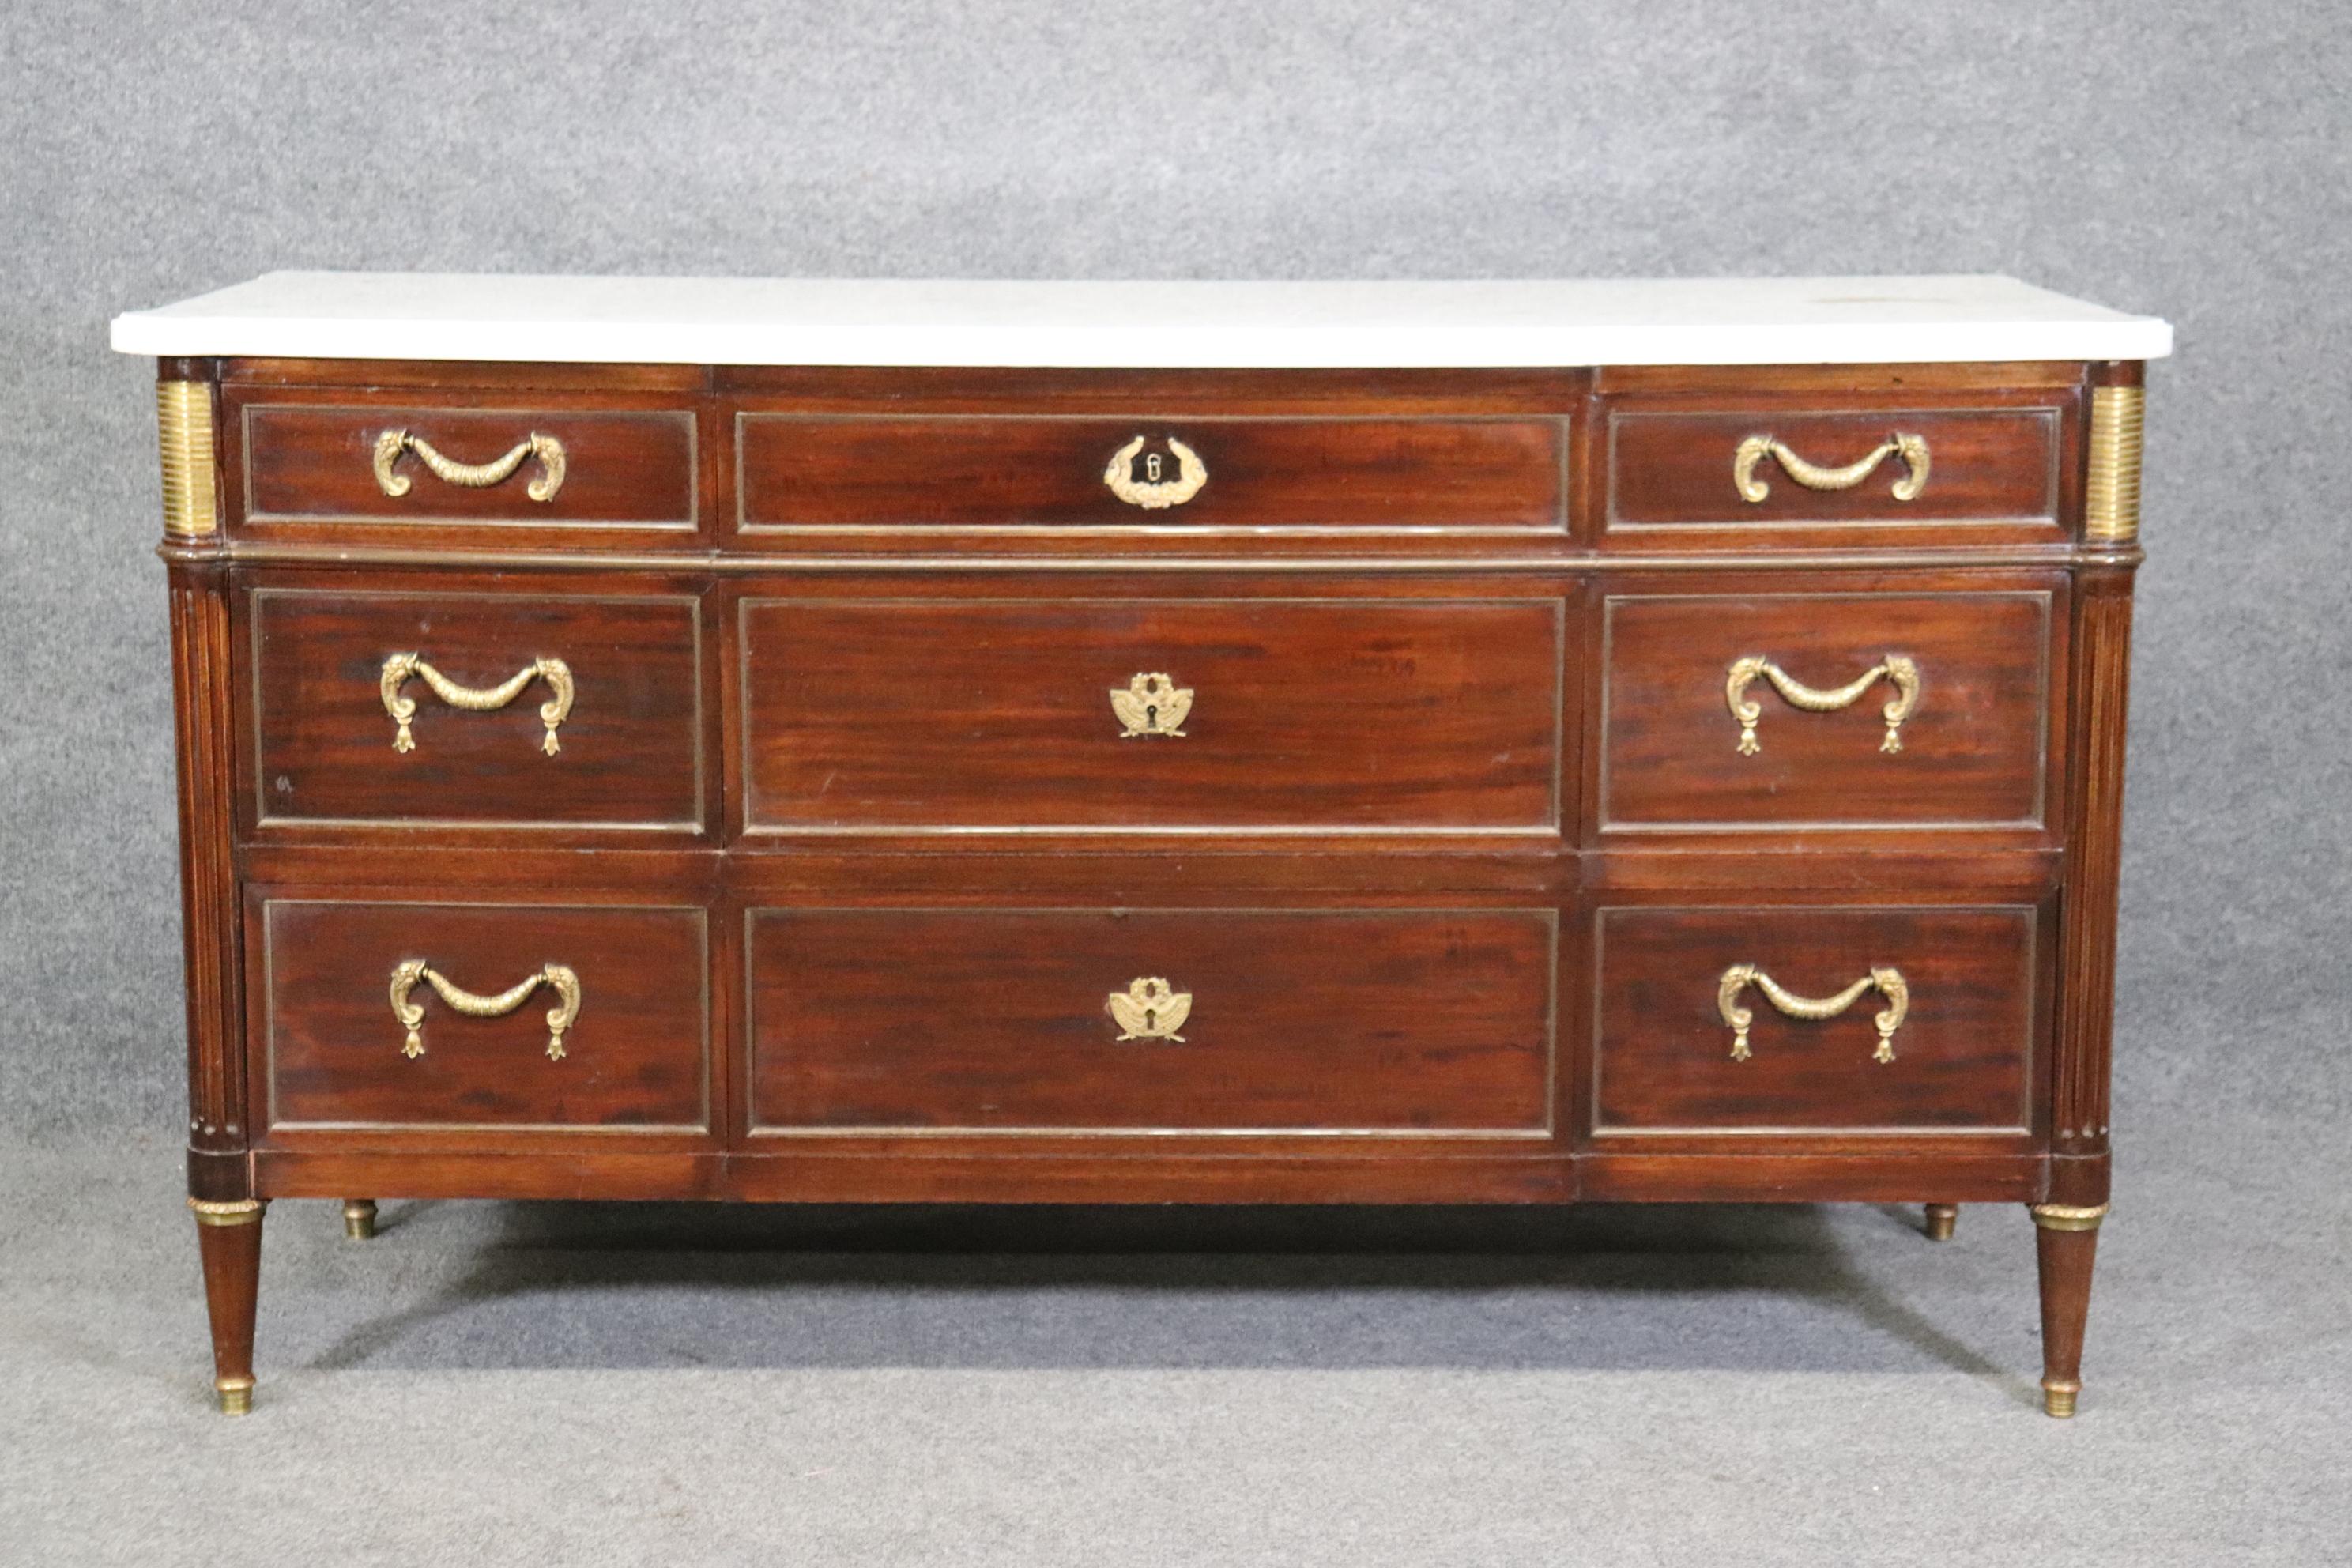 This is a fantastic signed Maison Jansen 9 drawer marble top dresser or commode. The piece features superb cast bronze and brass ormolu and a white carara marble top. The mahogany case is solid mahogany and the piece is in good condition and does